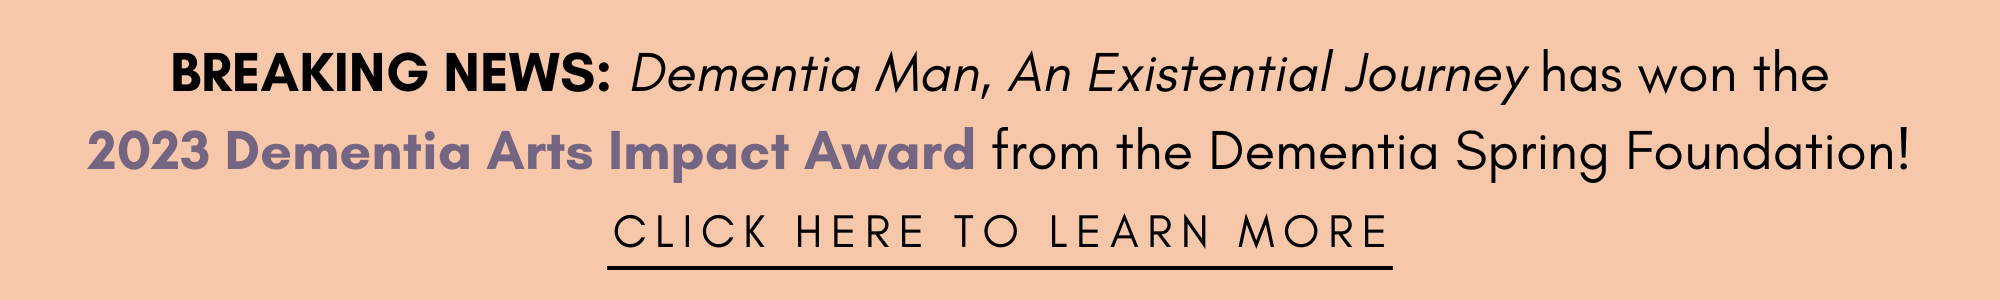 BREAKING NEWS: Dementia Man, An Existential Journey has won the 2023 Dementia Arts Impact Award from the Dementia Spring Foundation! Click here to learn more. Picture